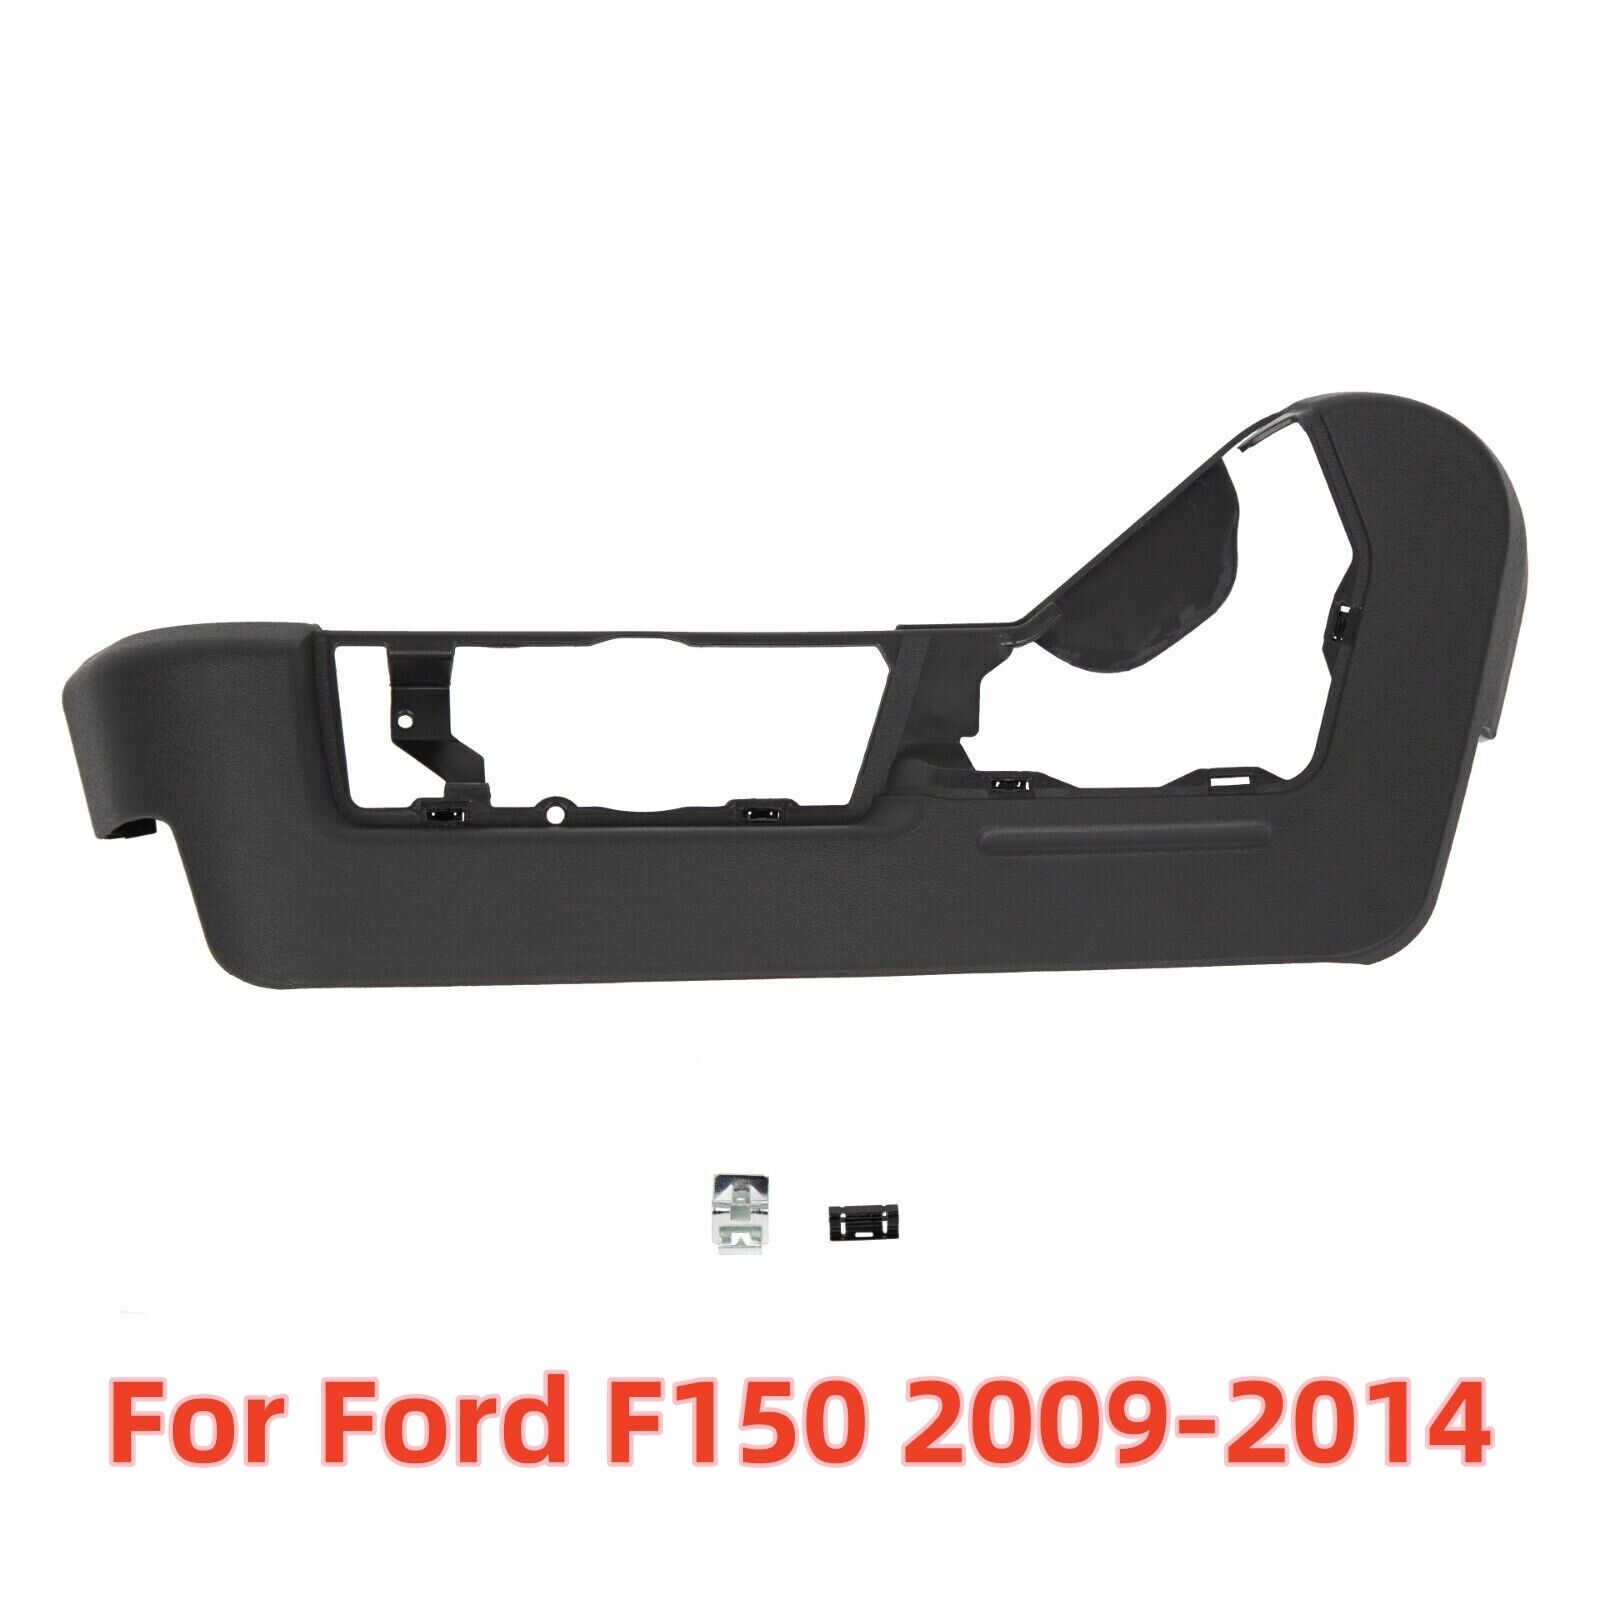 For 2009-2014 Ford F150 Seat Cover Trim Panel Bezel Black Drivers Side